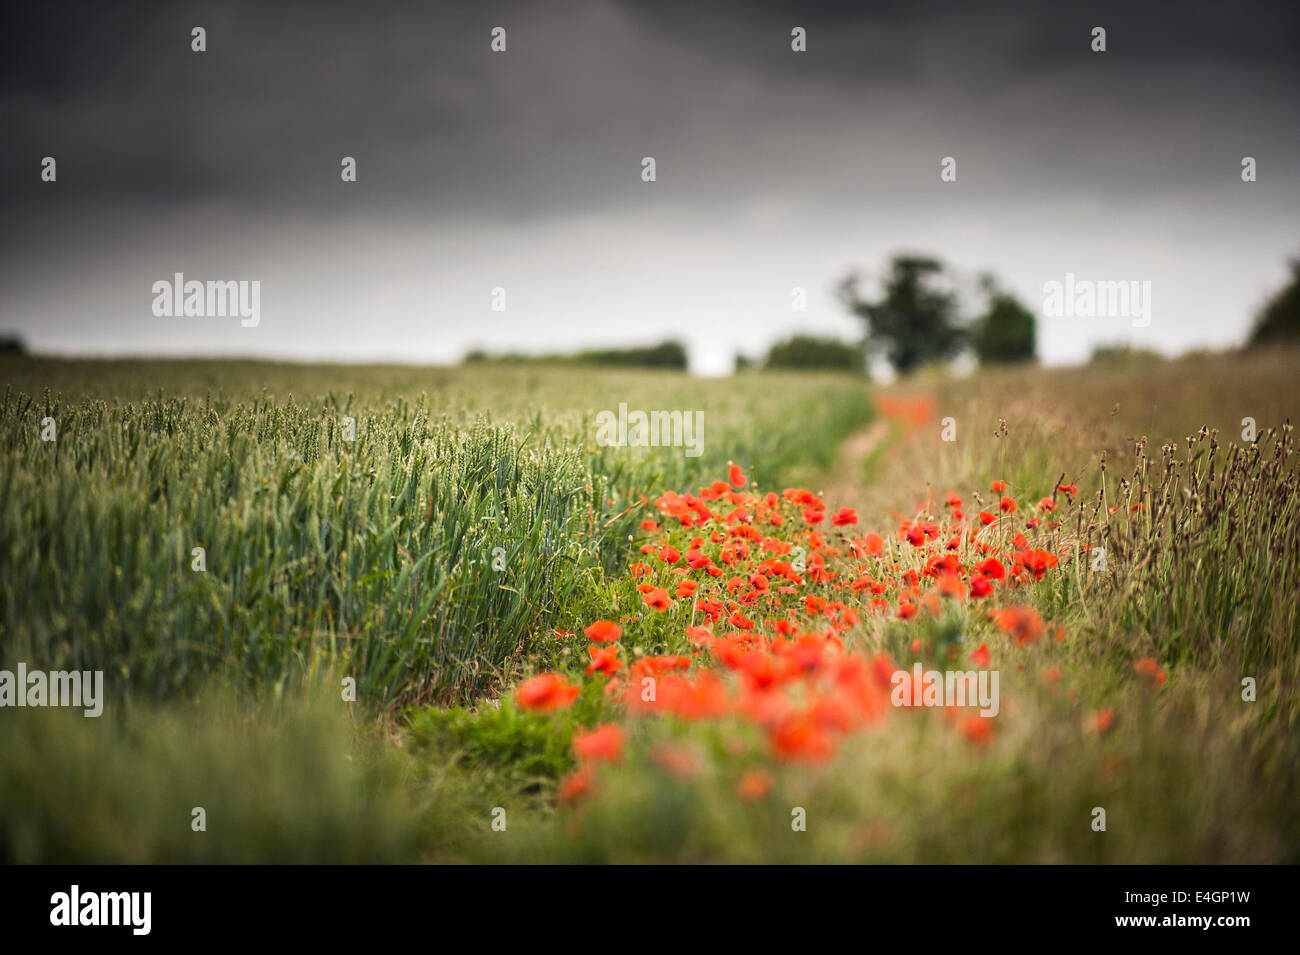 Poppies growing in a field. Stock Photo